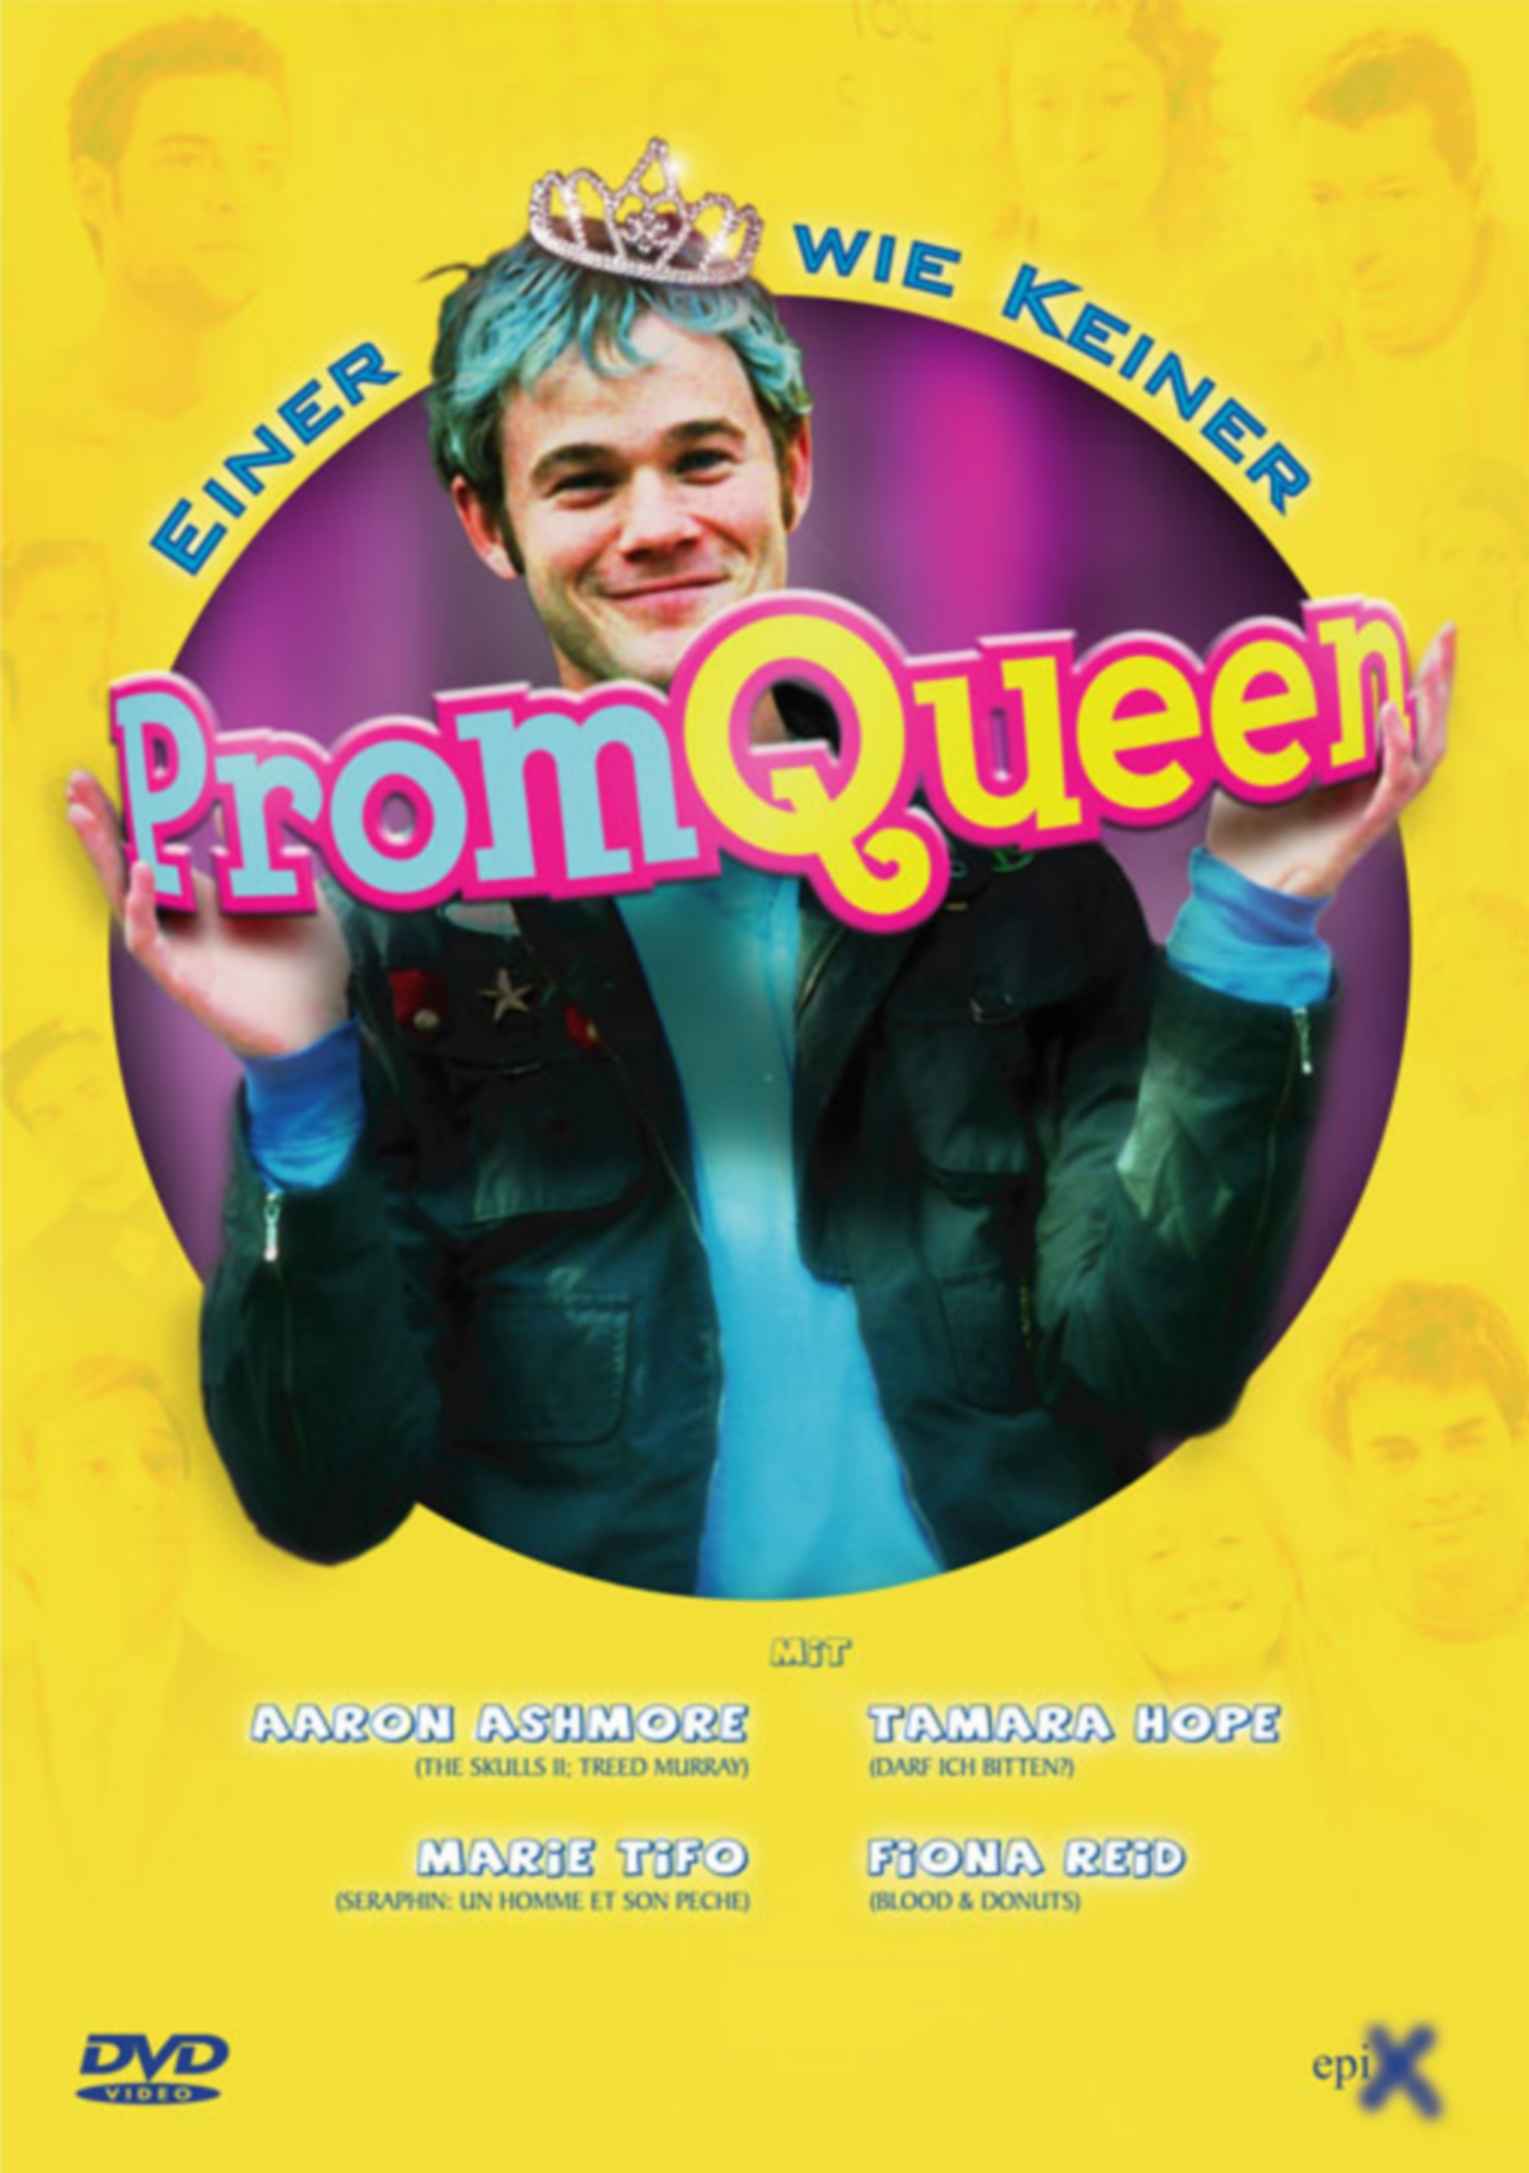 PROM QUEEN-FrontCover-FINAL